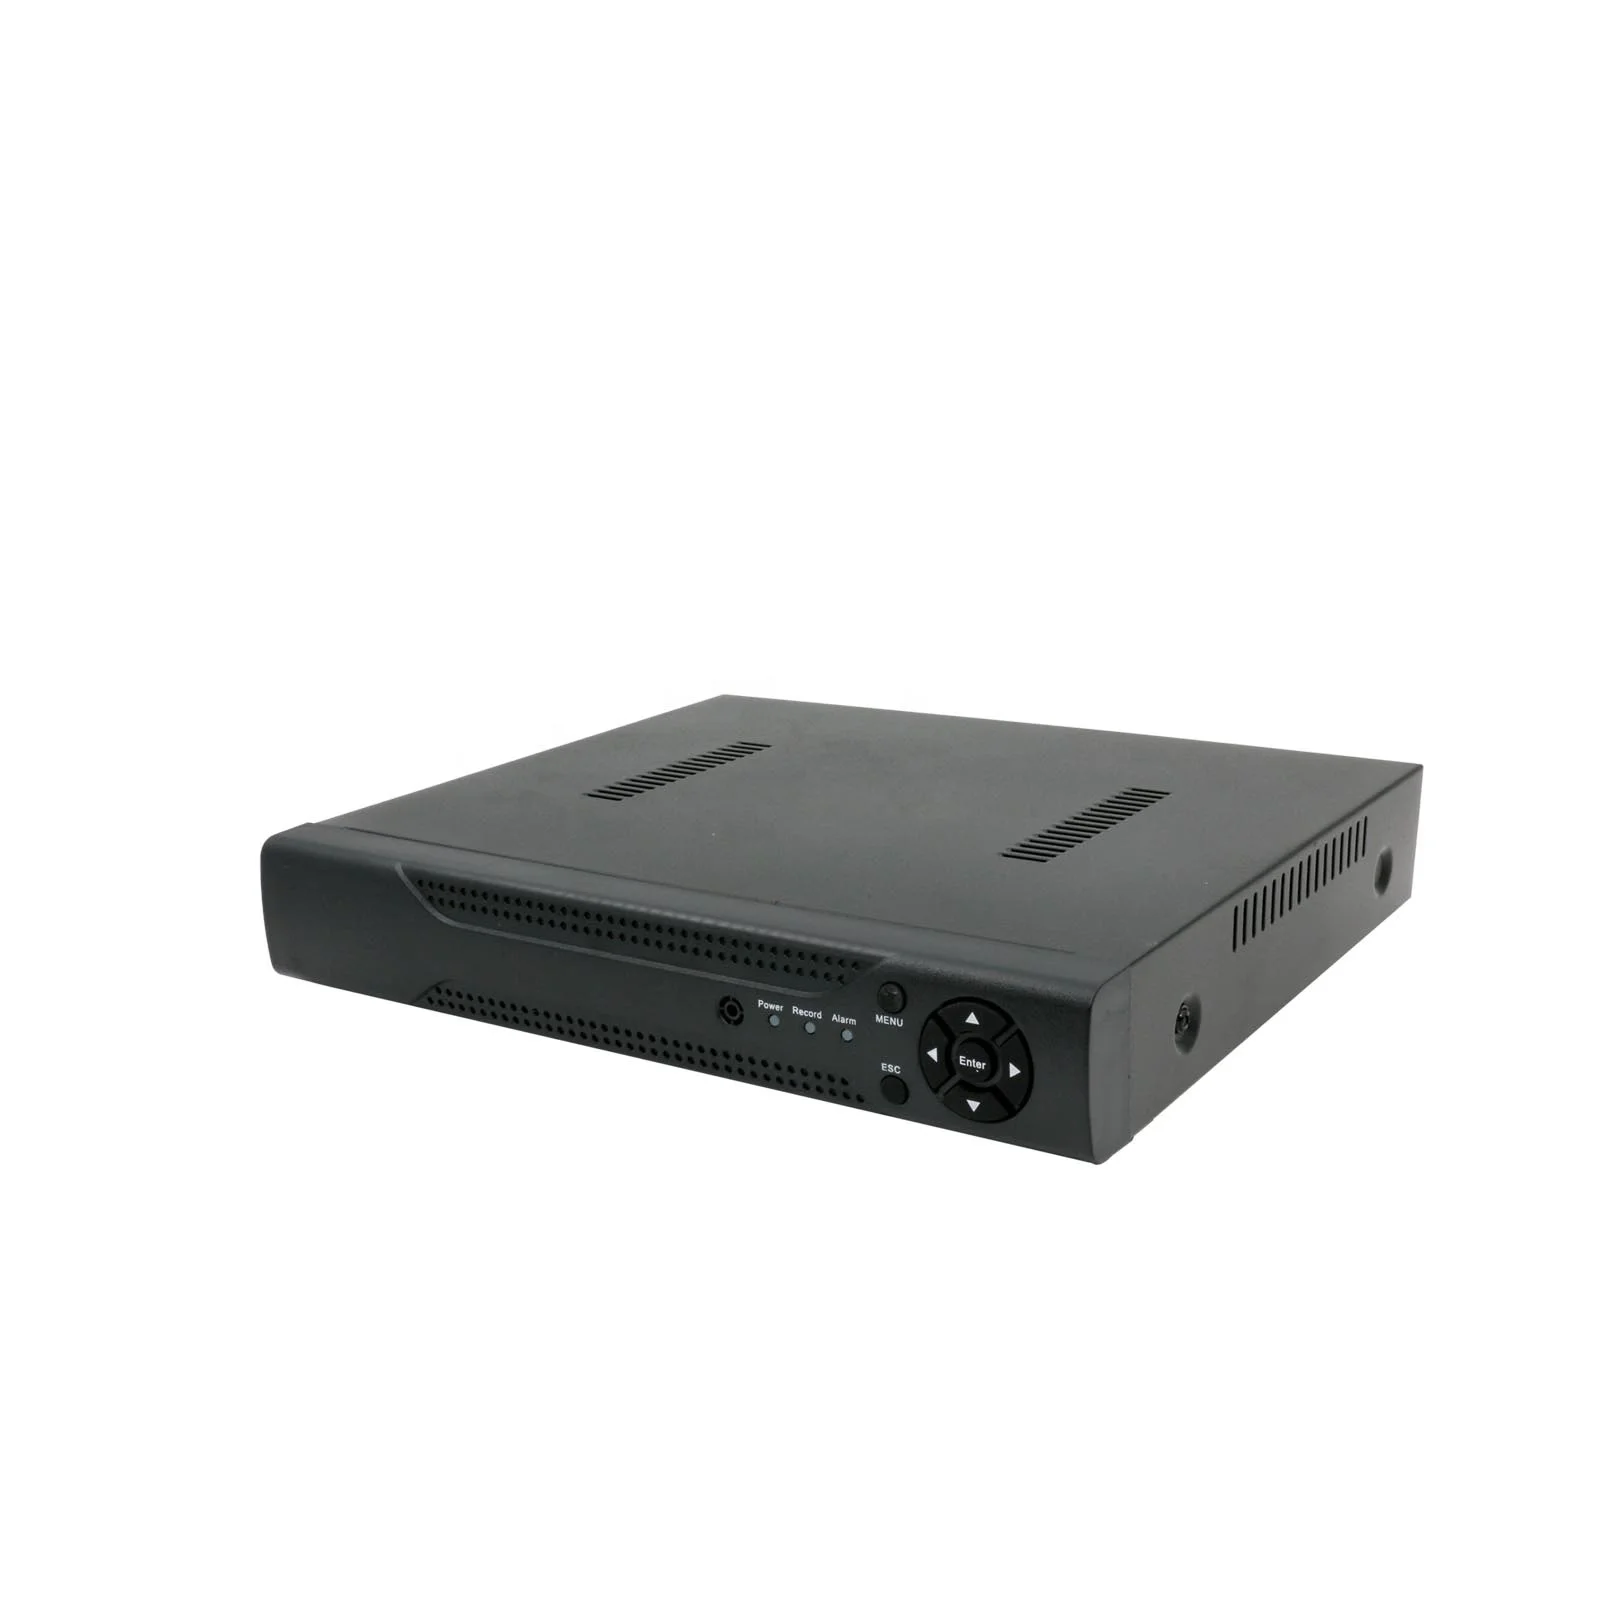 6 in 1 HVR 1080N 4CH Economy HVR  RCA 1CH in 1CH Out Network Download SATA HDD (1600474323587)